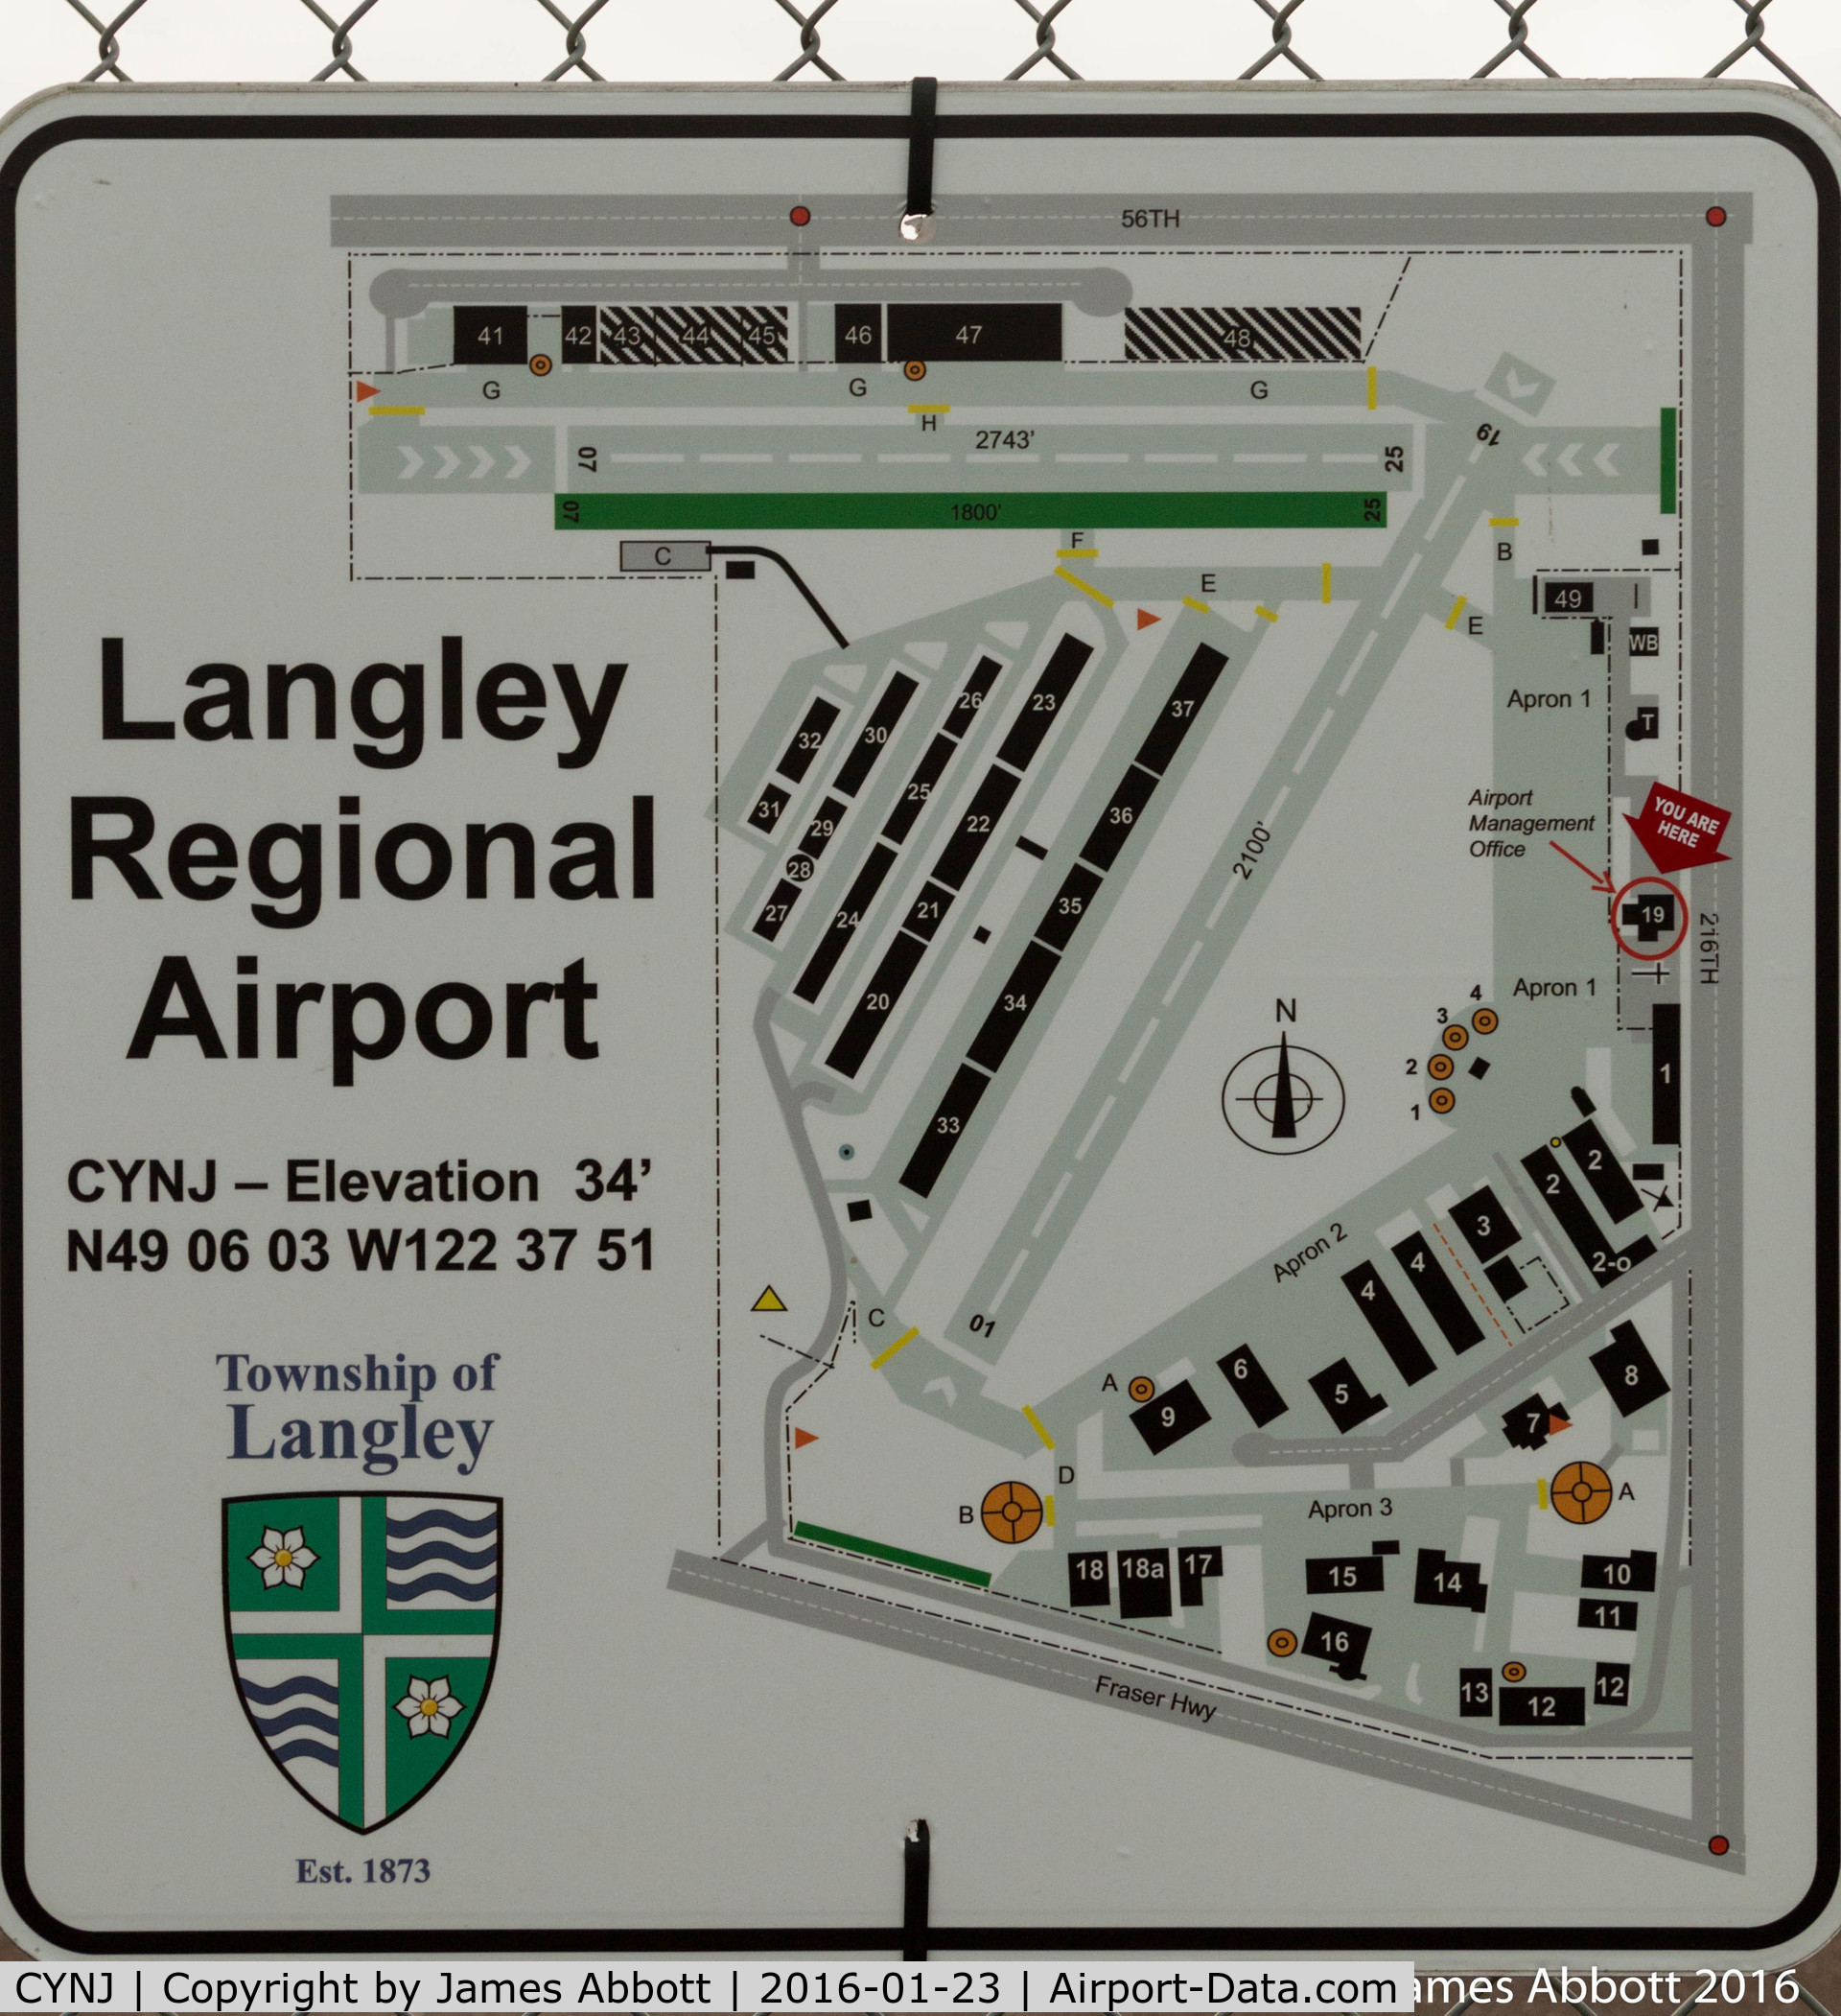 Langley Regional Airport, Langley, BC Canada (CYNJ) - You are here. Map of Langley Regional Airport